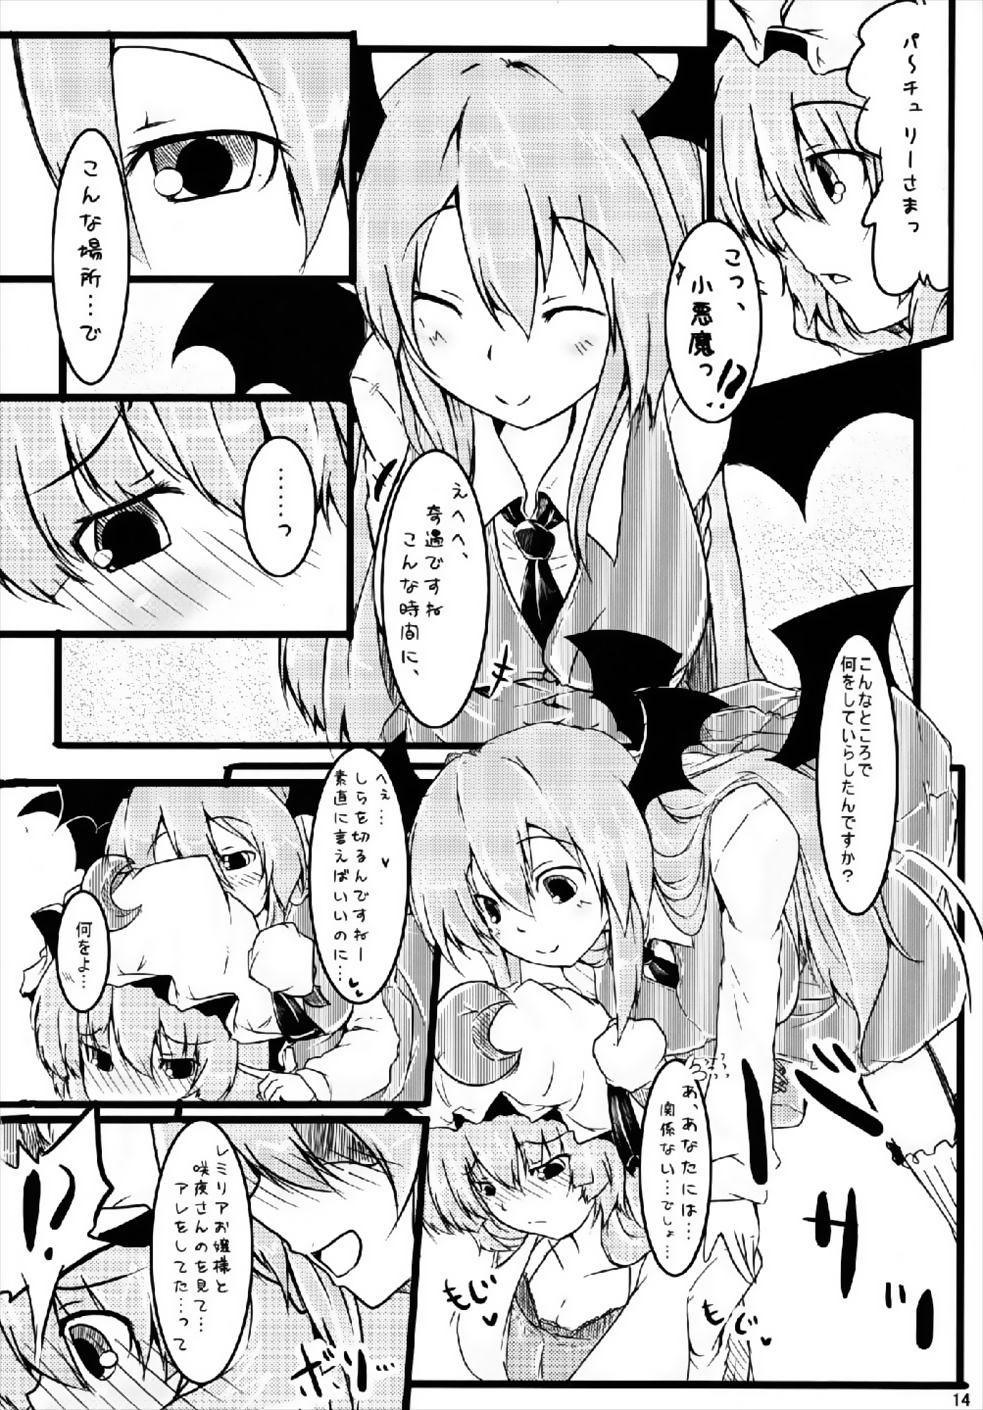 Toilet RemiFlaPatche! - Touhou project Teamskeet - Page 13